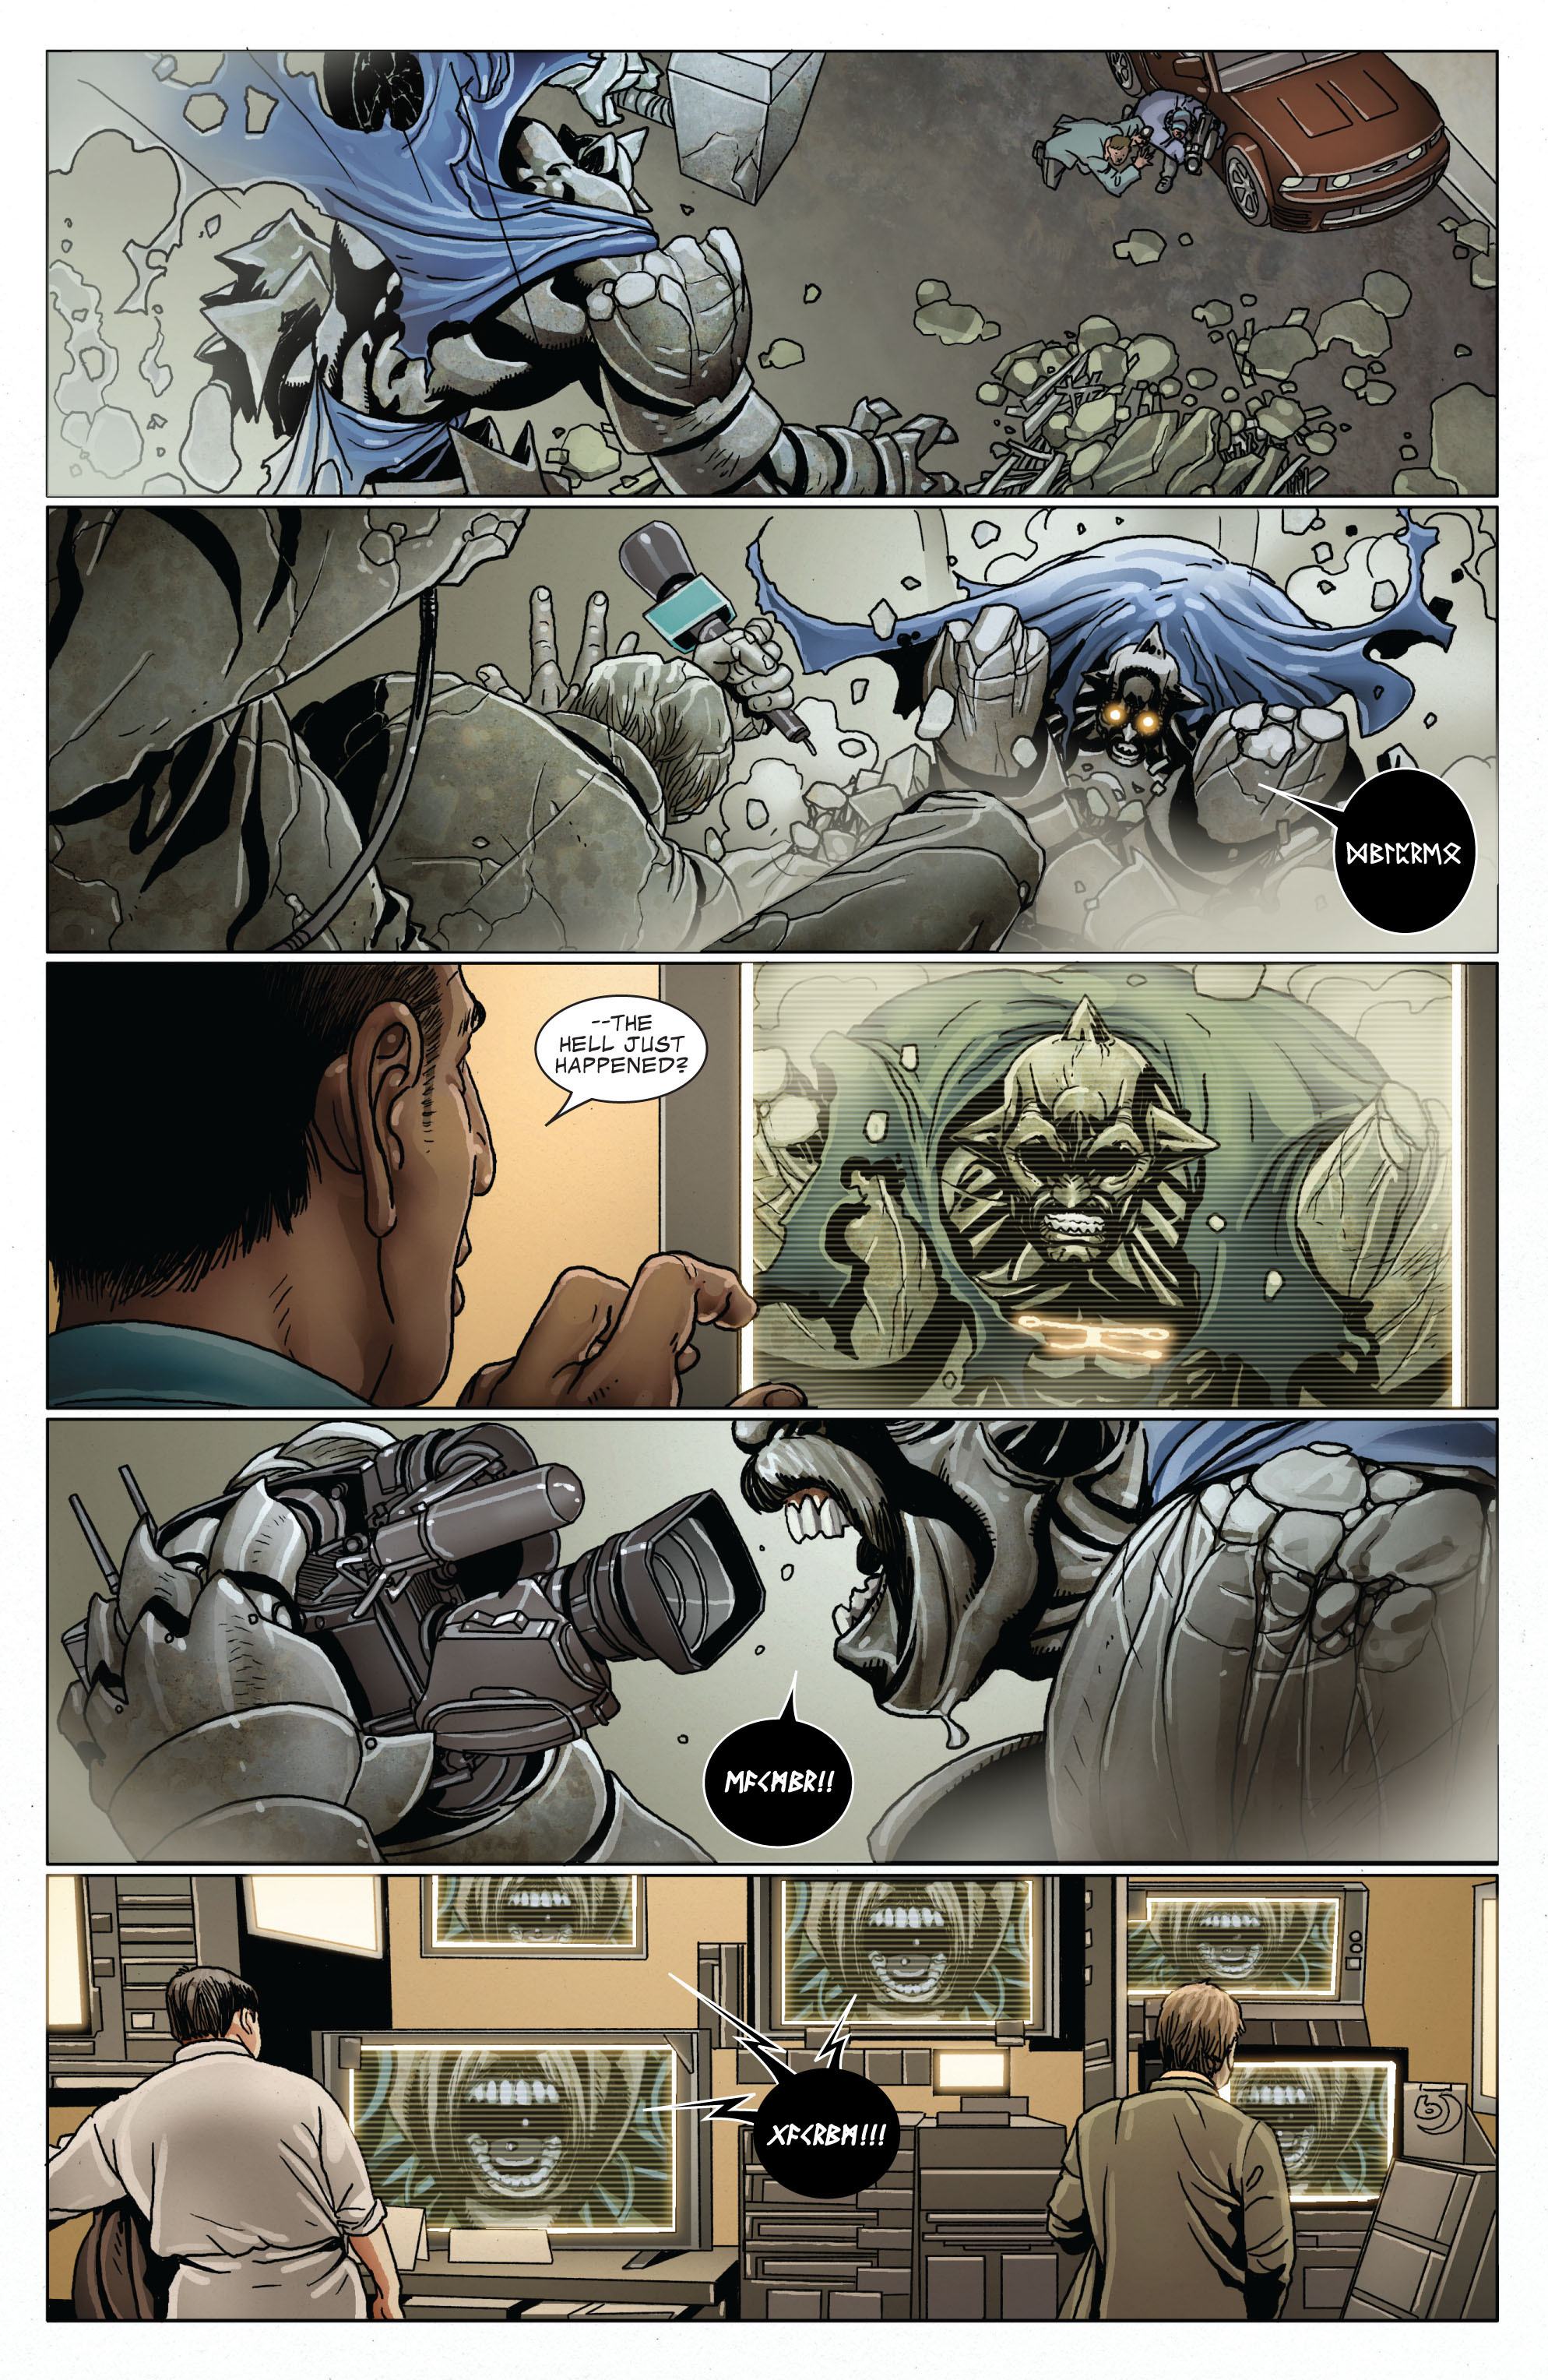 Invincible Iron Man (2008) 507 Page 7